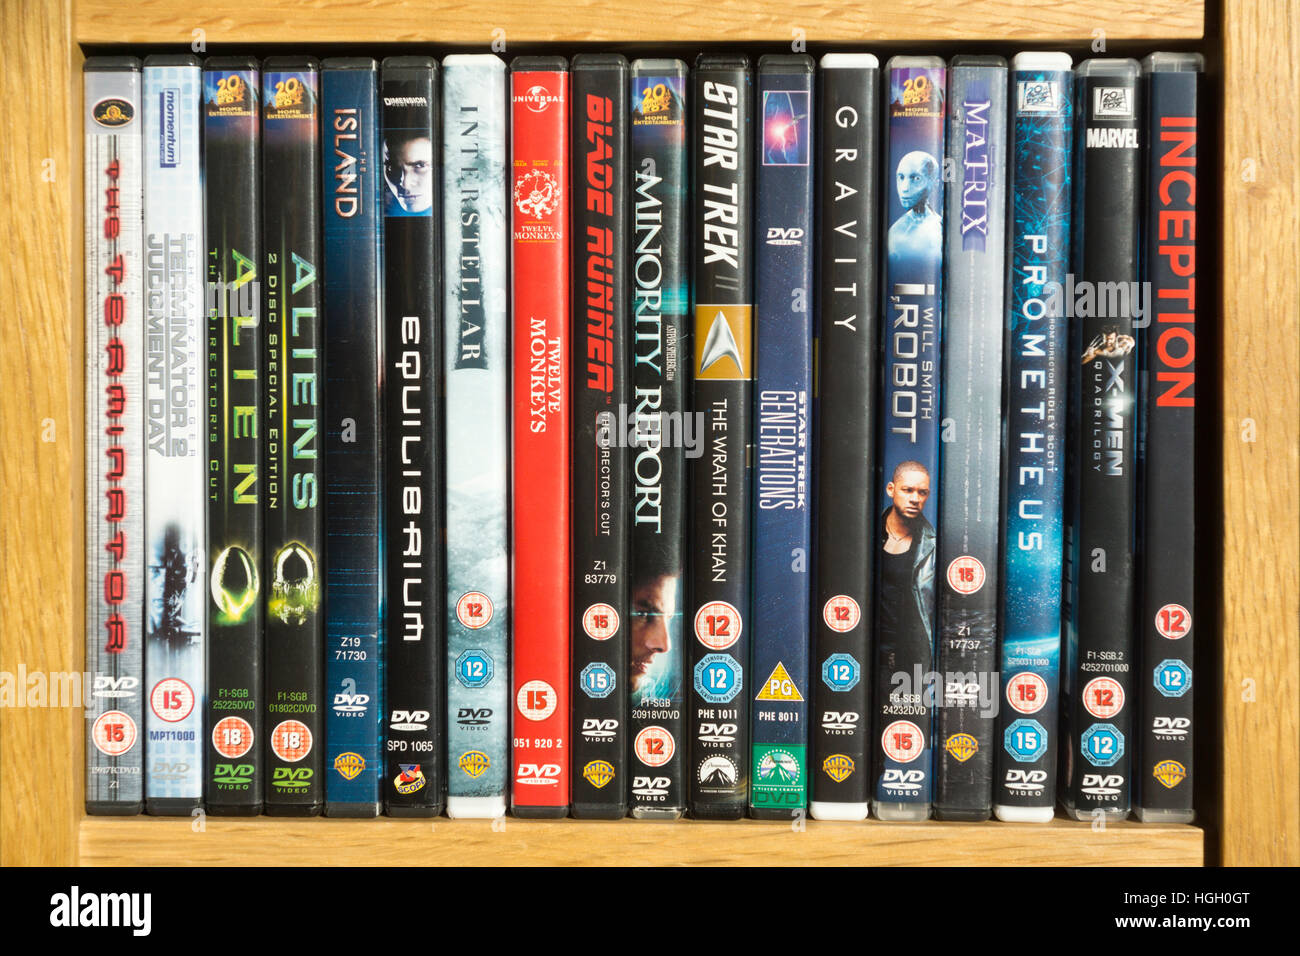 Science fiction DVDs Stock Photo